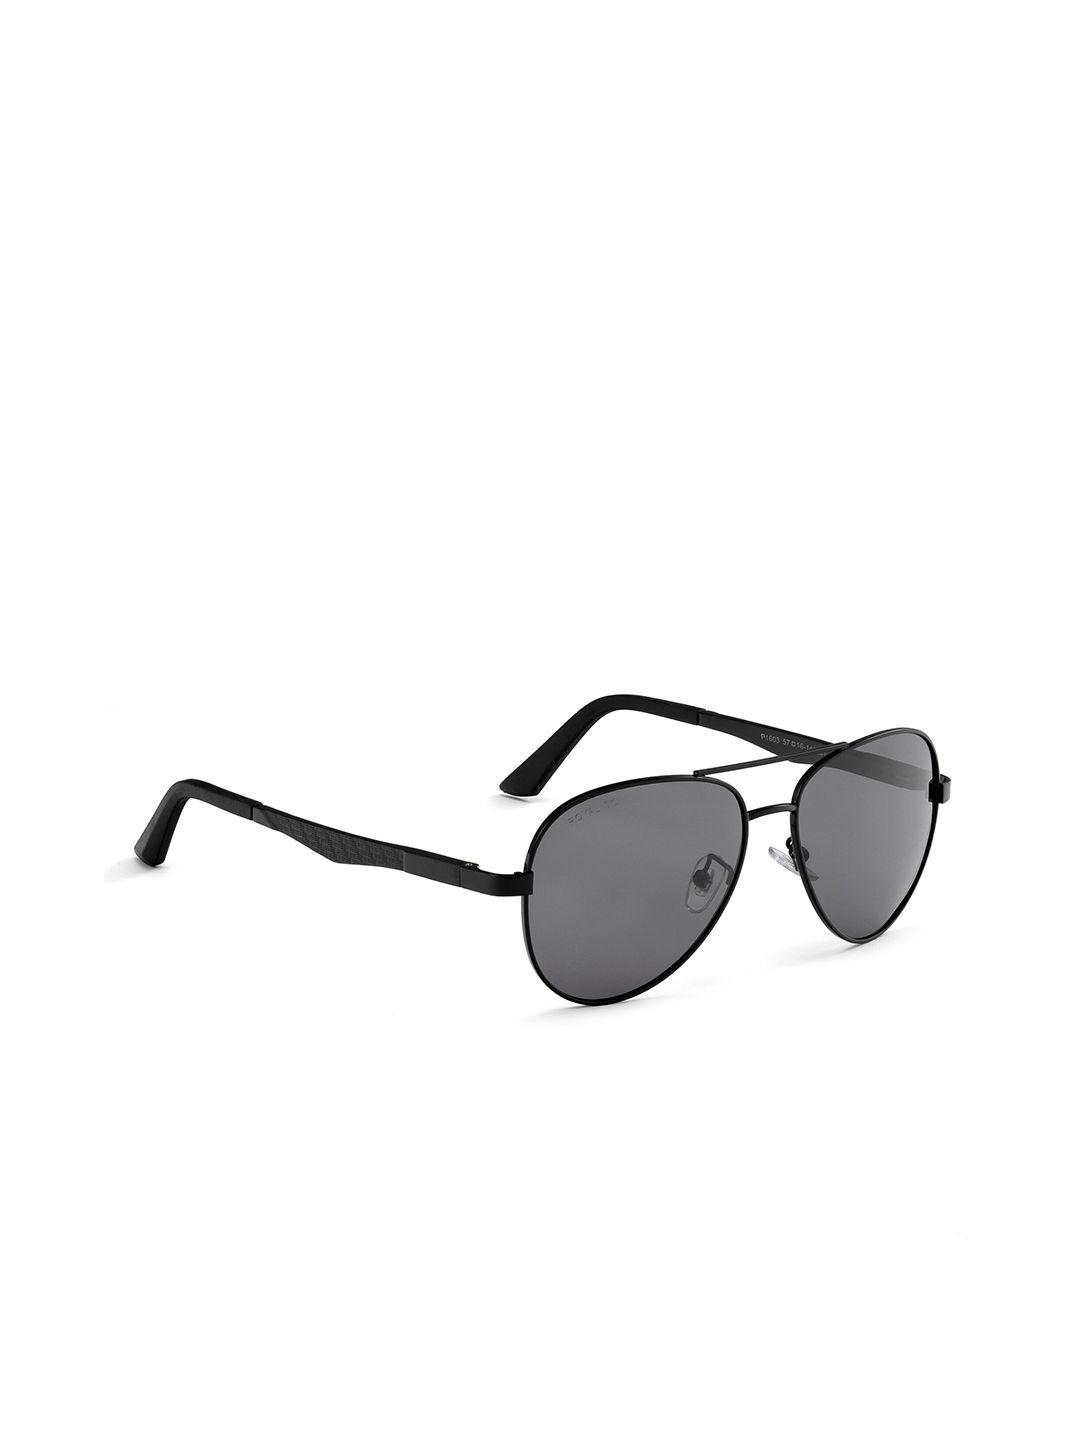 royal son unisex aviator sunglasses with polarised and uv protected lens